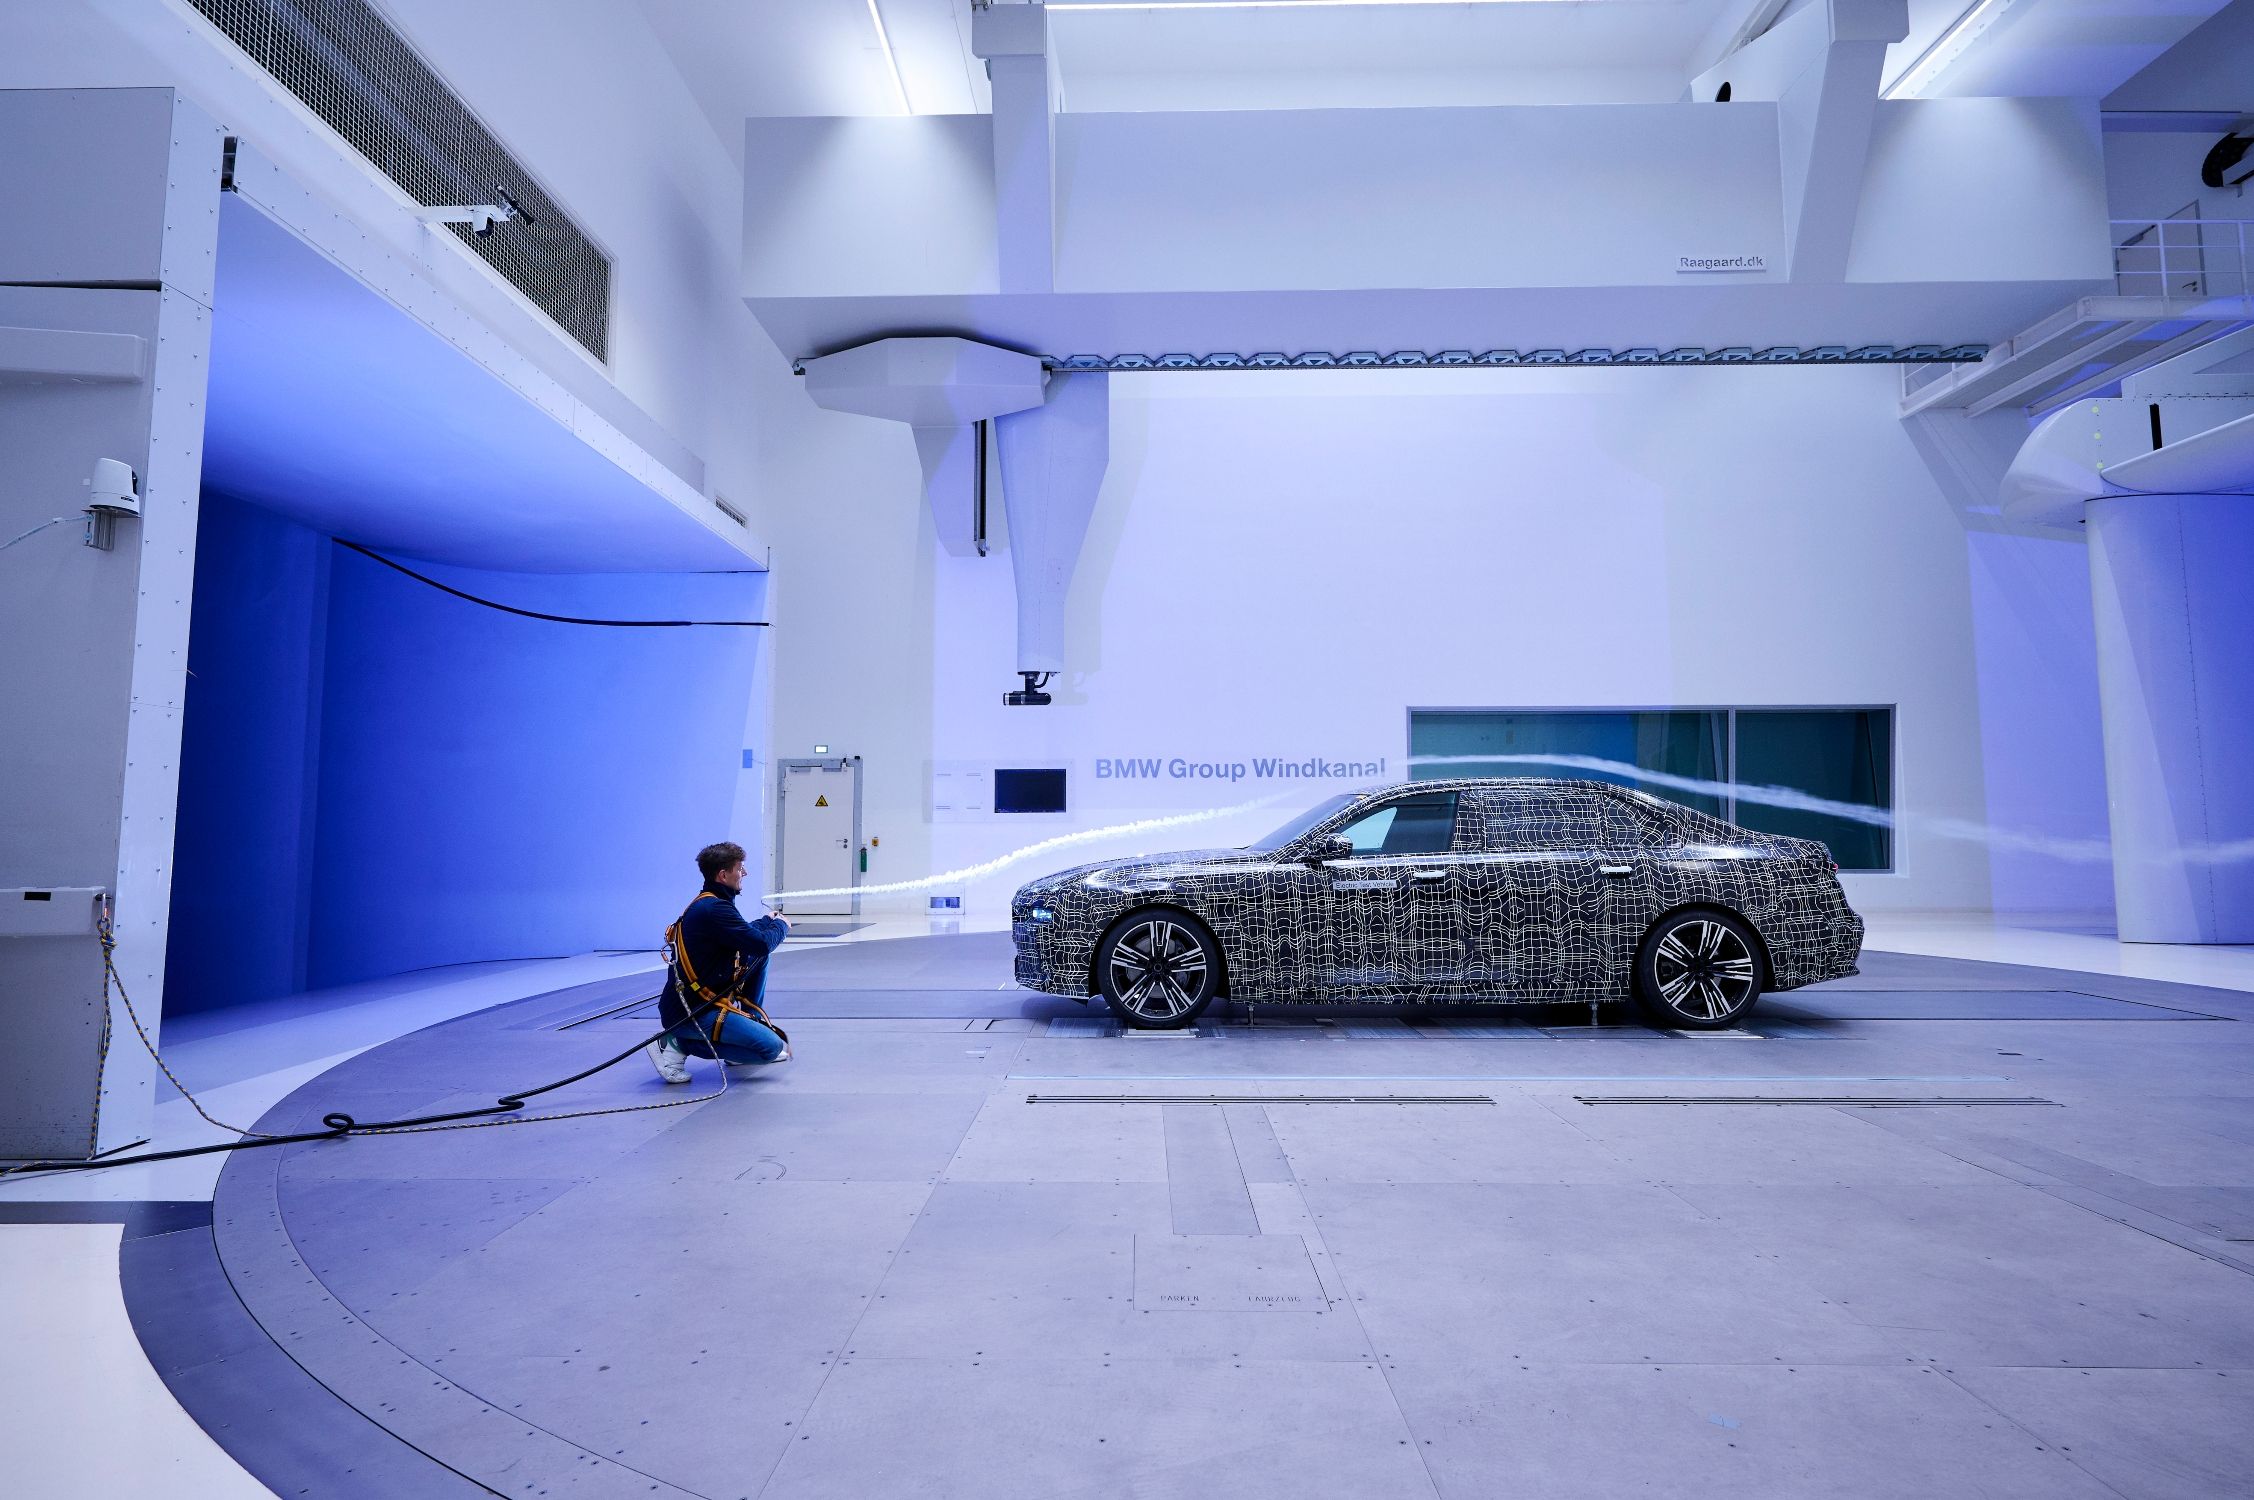 The vehicle's aerodynamic package is examined in the wind tunnel